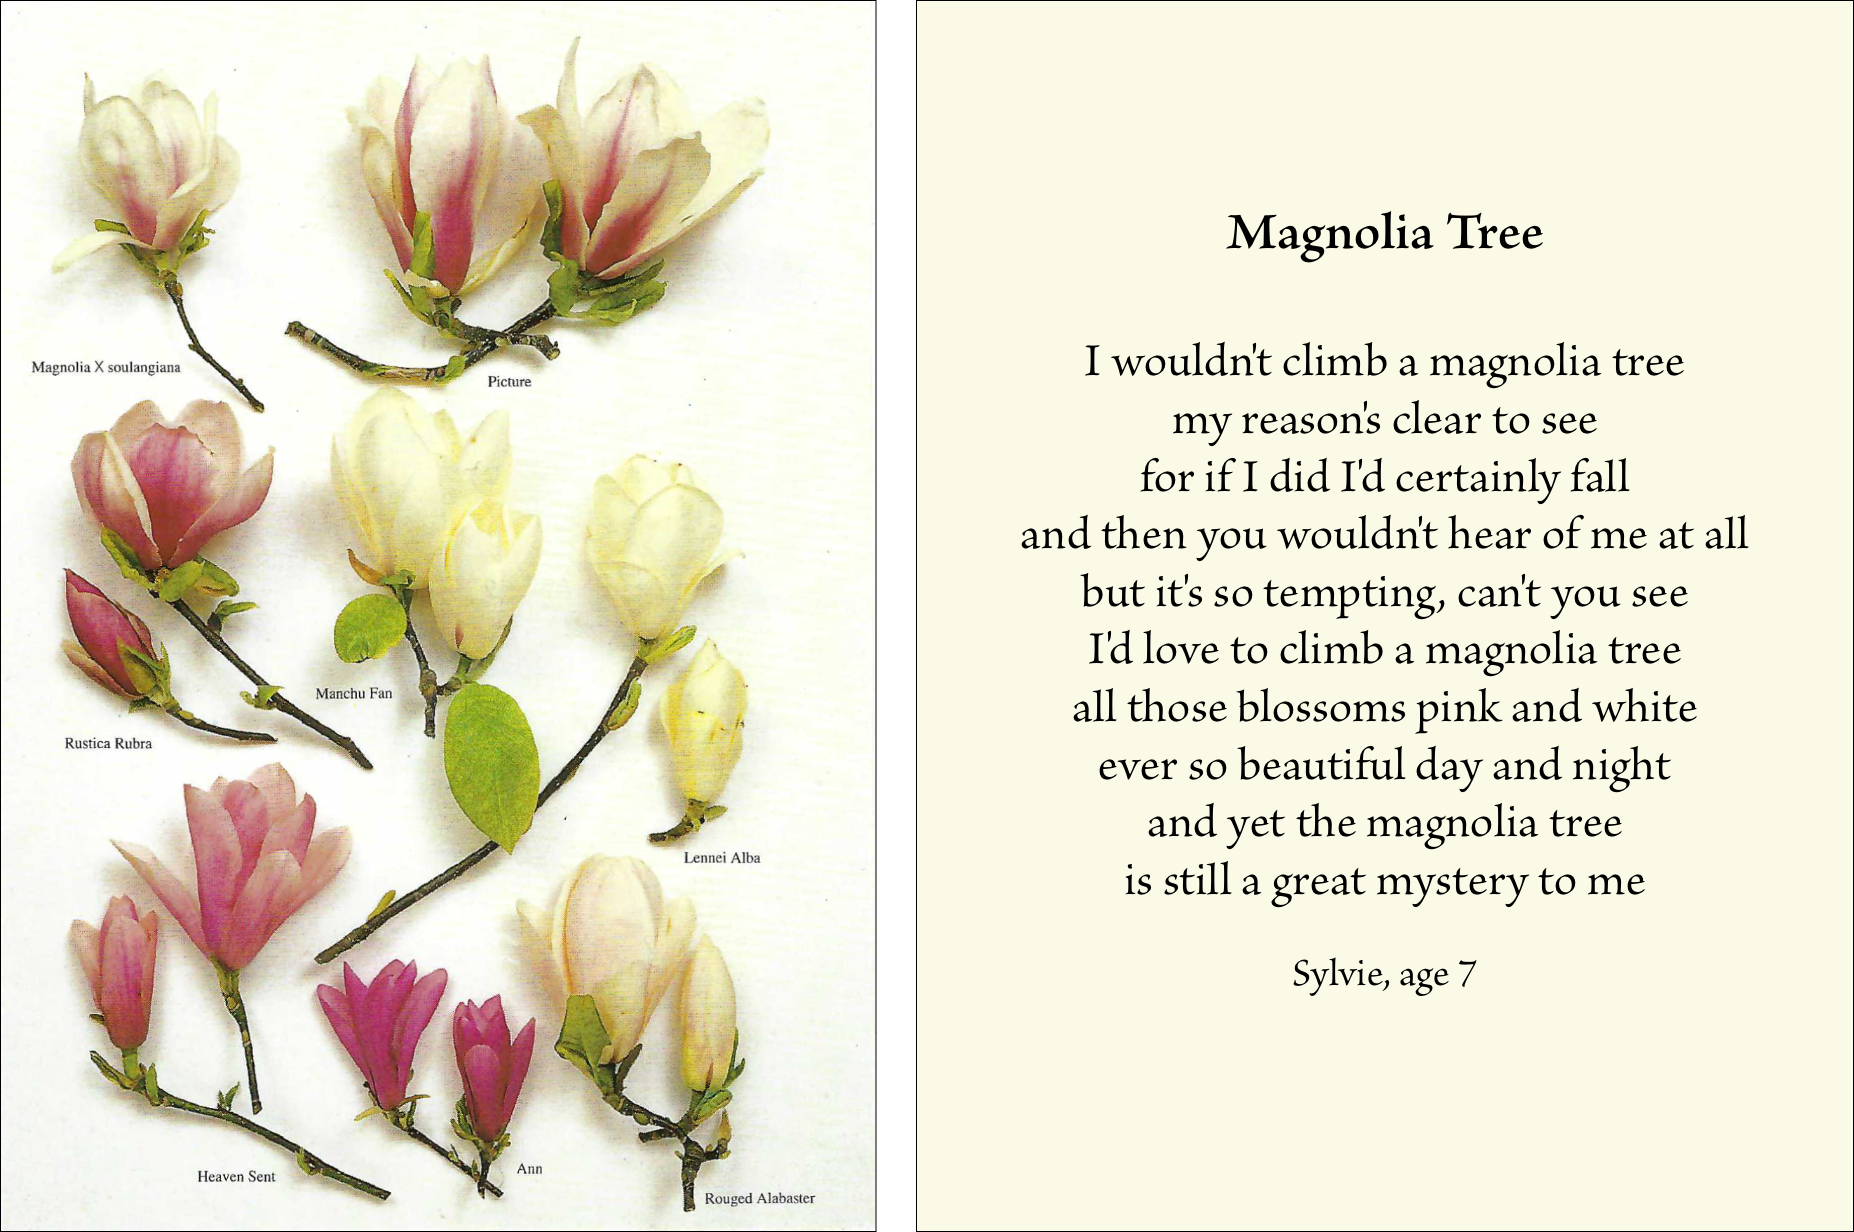 Diptych image with varieties of magnolia blossoms on left and poem about a magnolia tree by a 7-year old girl on right